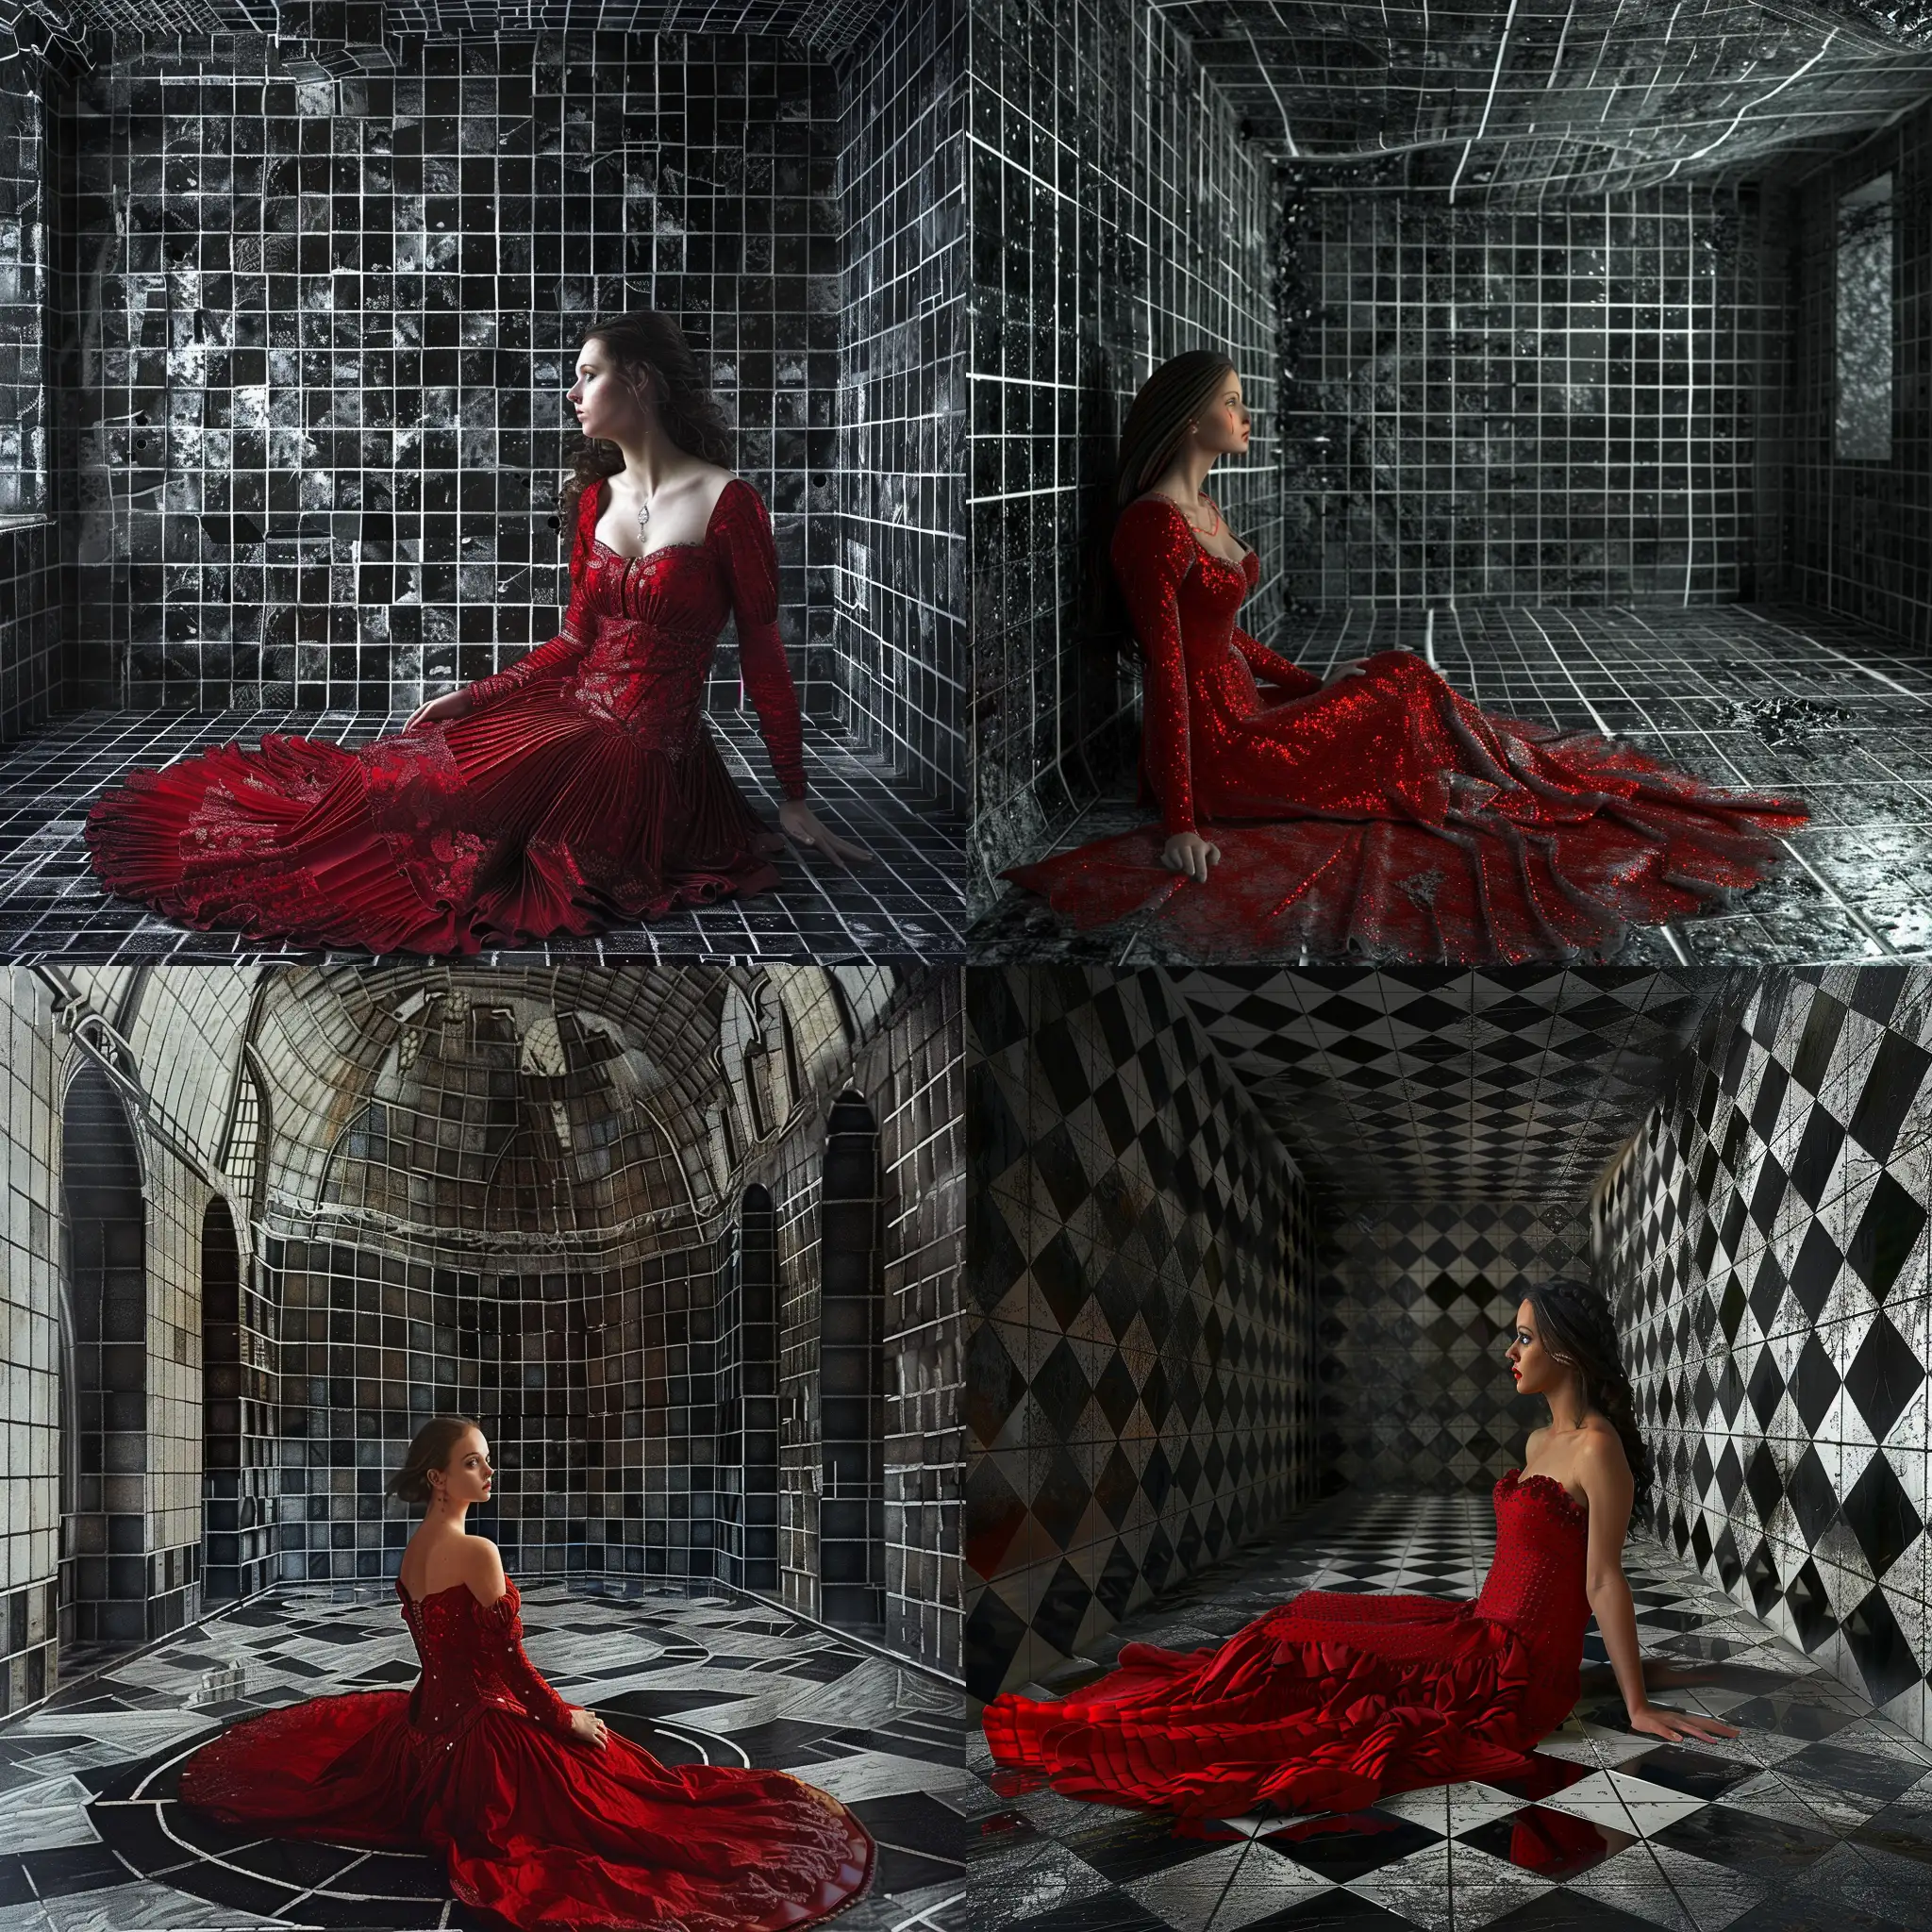 Enchanting-Medieval-Woman-in-Red-Dress-Amidst-Surreal-Black-and-White-Tiles